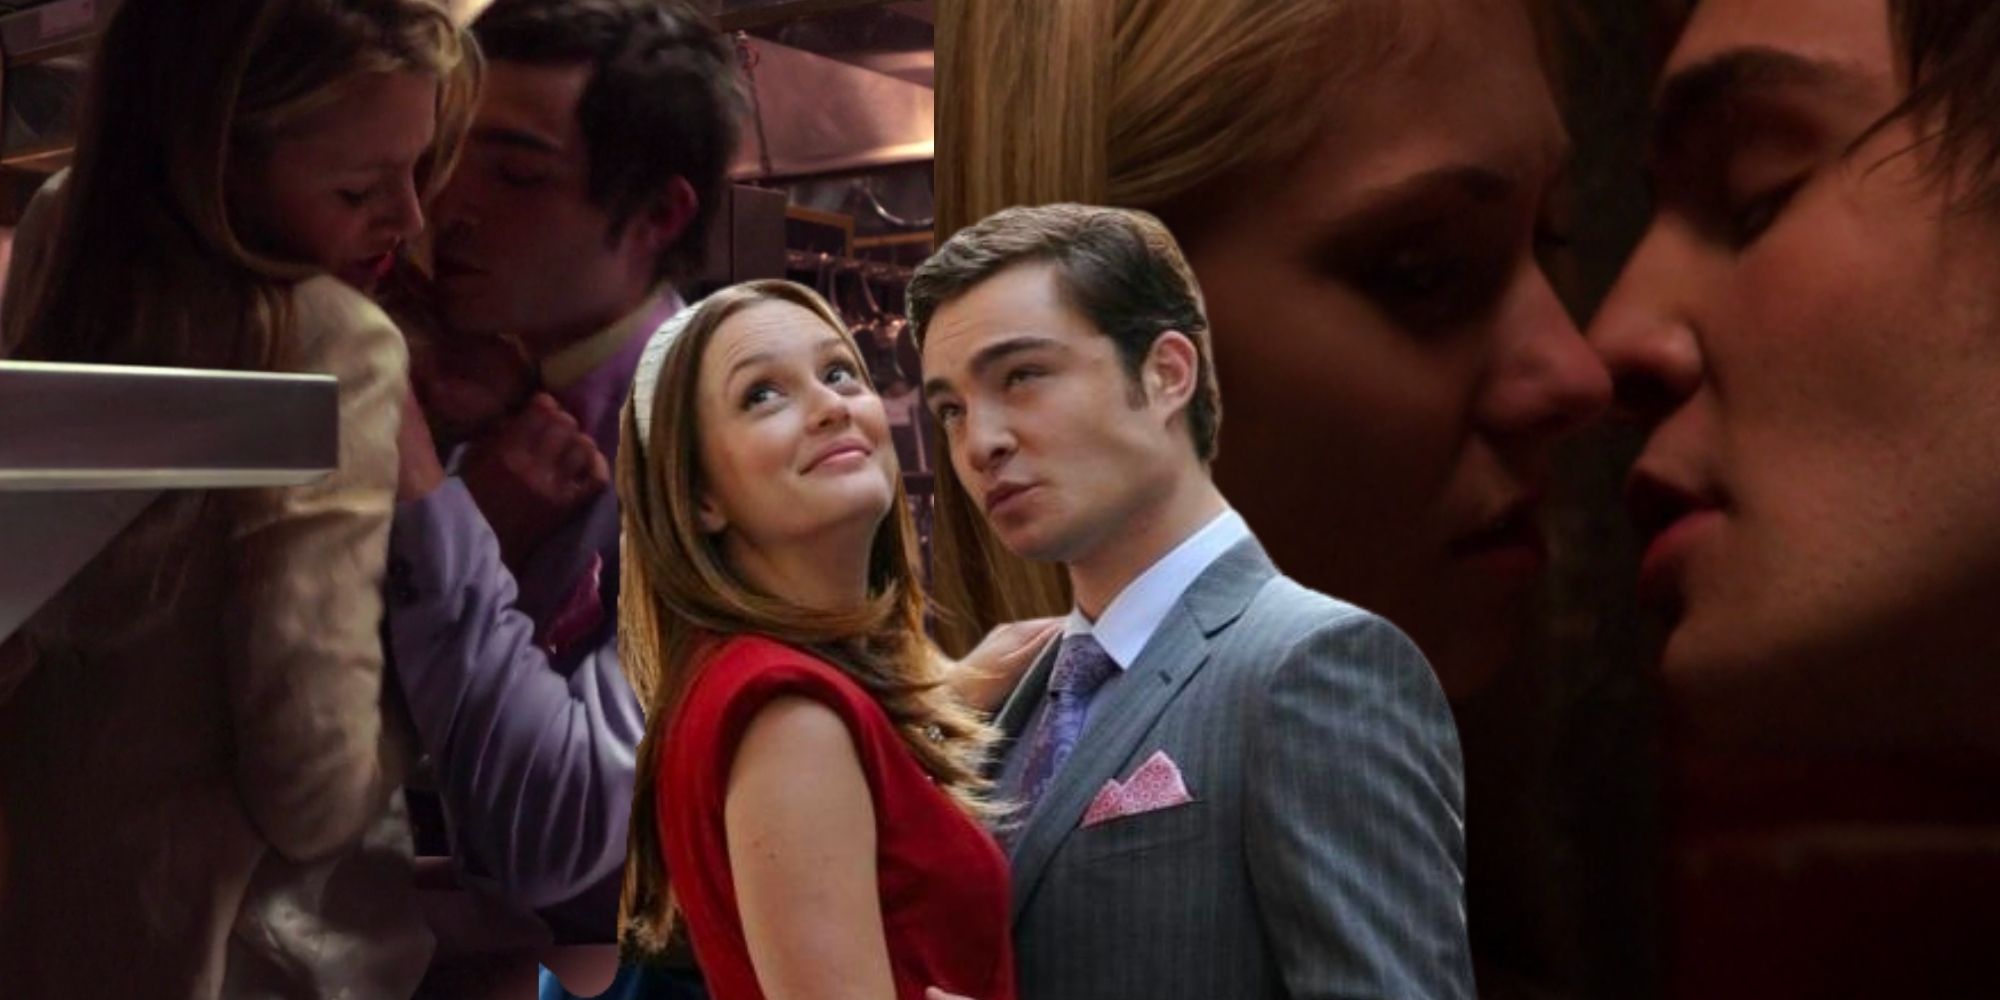 Ed Westwick and Leighton Meester in Gossip Girl Chuck assaulting girls, then smiling with Blair